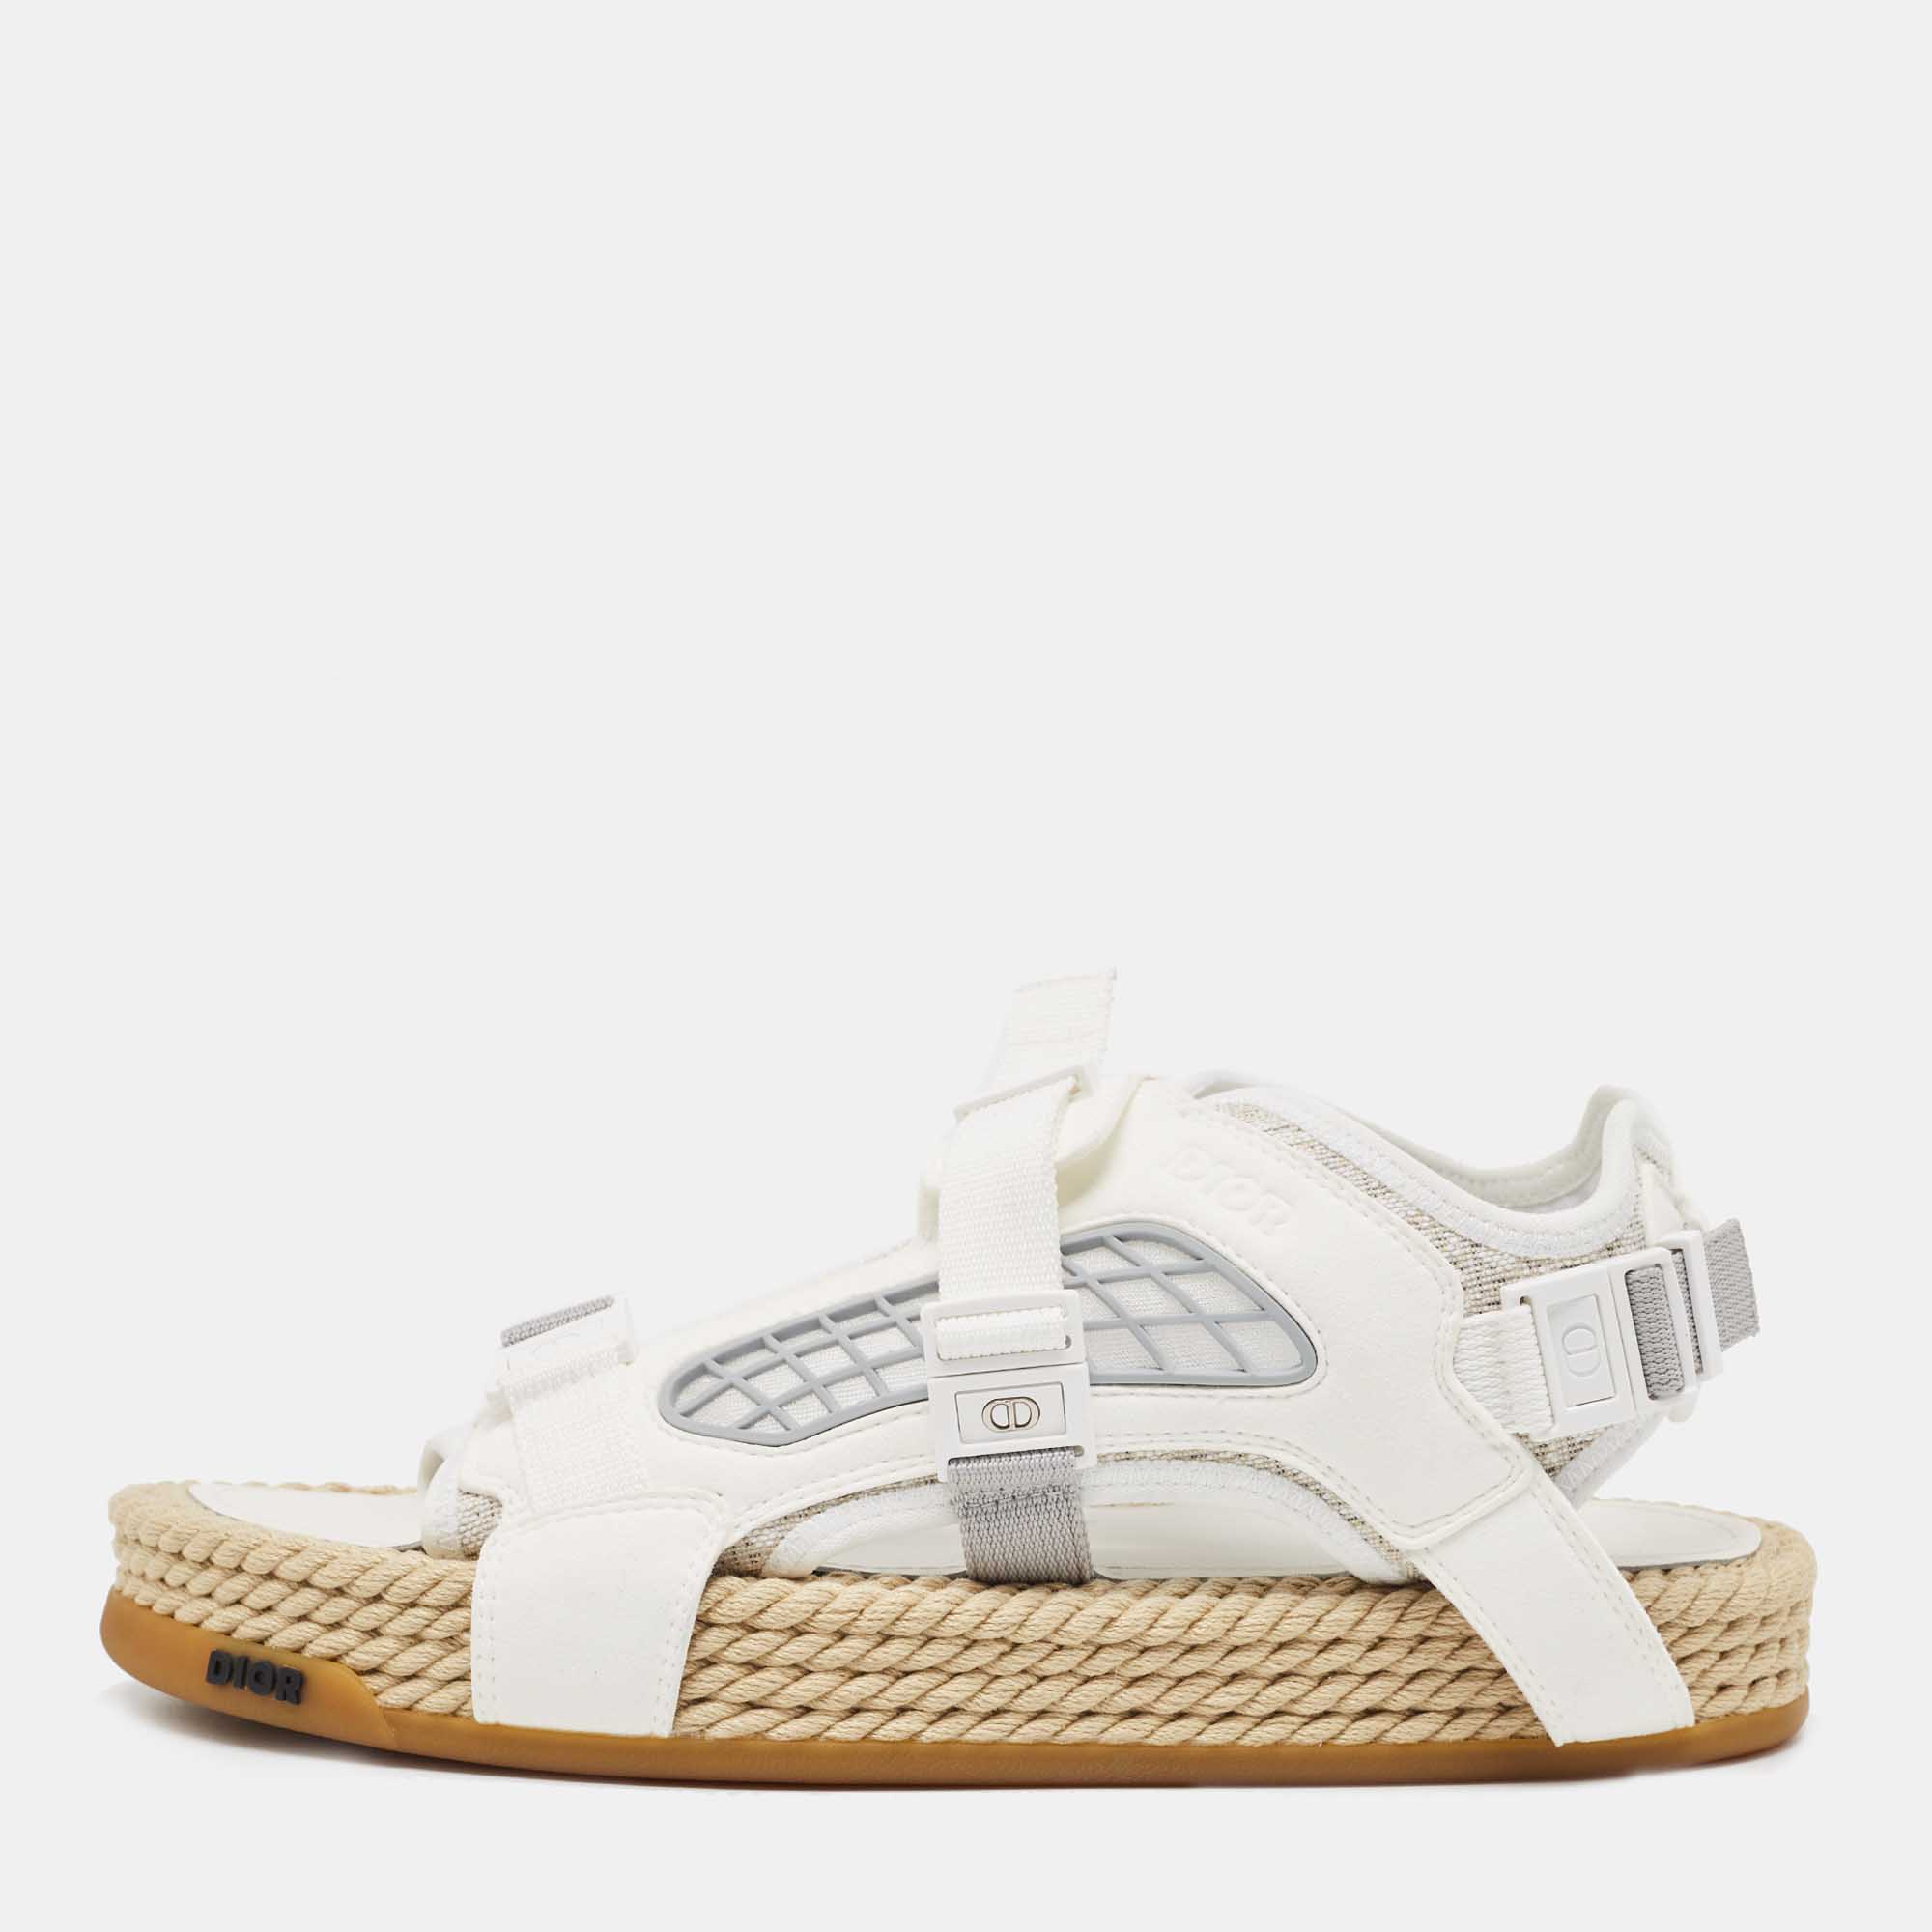  Dior White Canvas and Suede Atlas Sandals Size 41